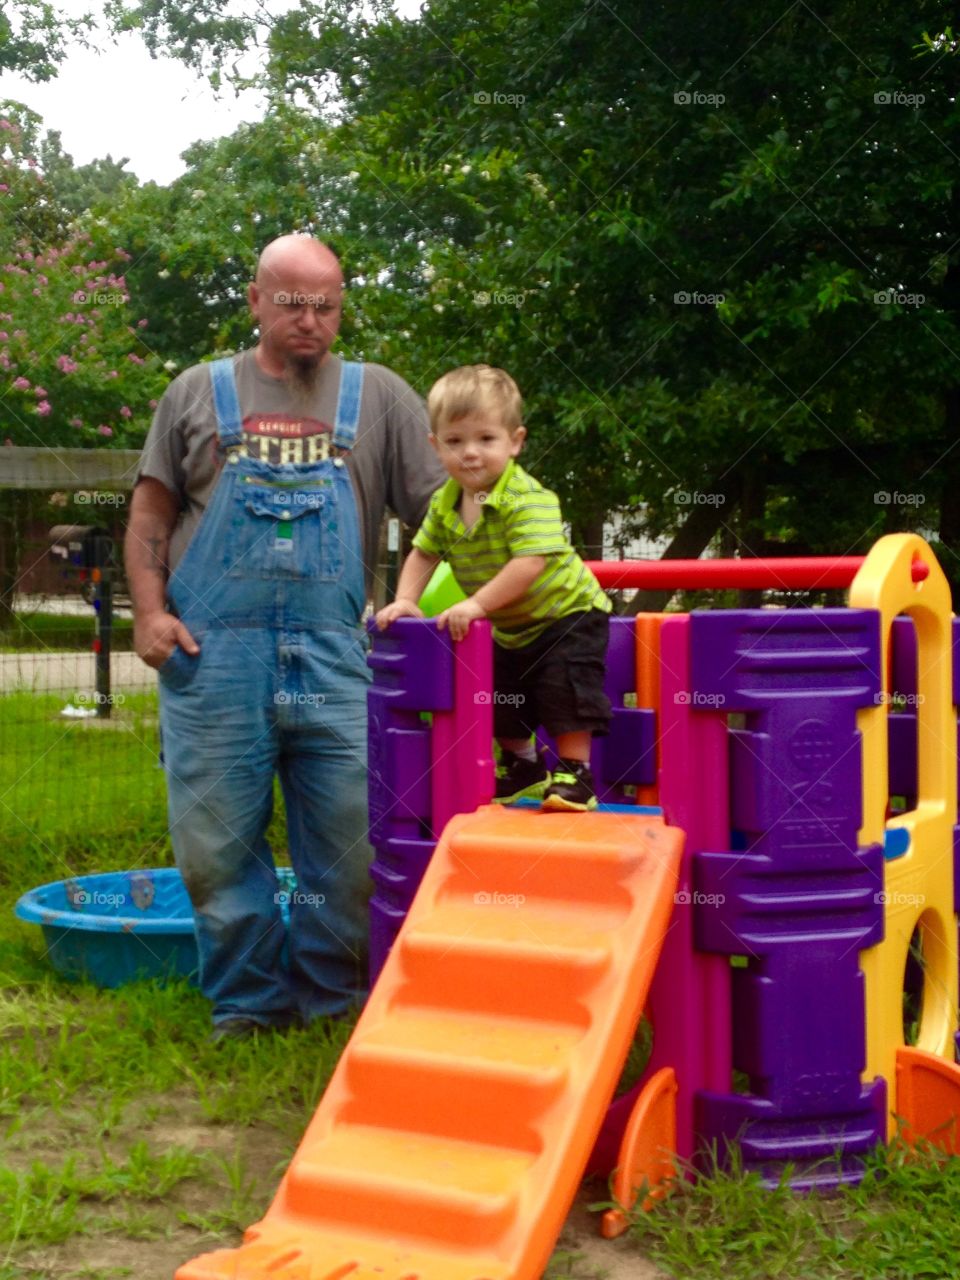 Pawpaw helping grandson playing on a plastic toys. Pawpaw wearing  denim overalls